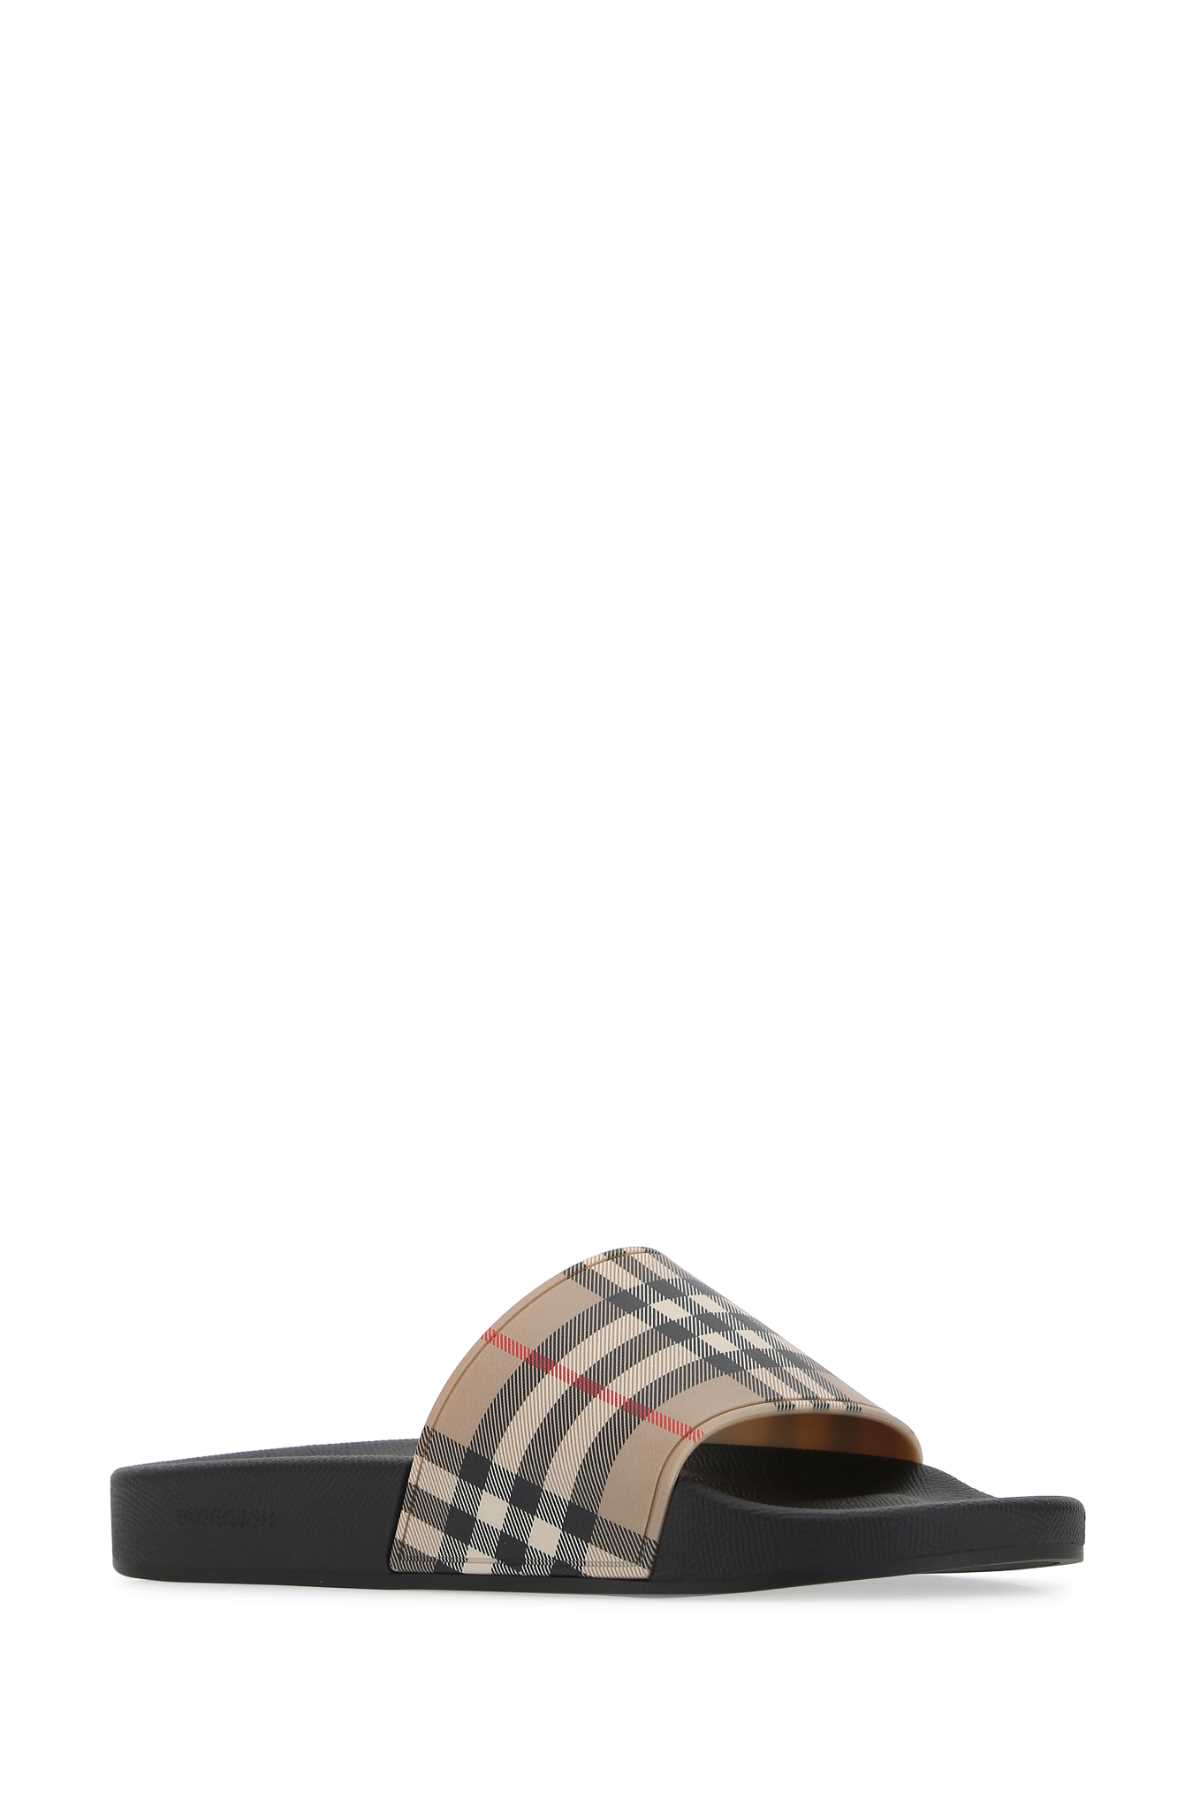 Shop Burberry Printed Rubber Slippers In A7028